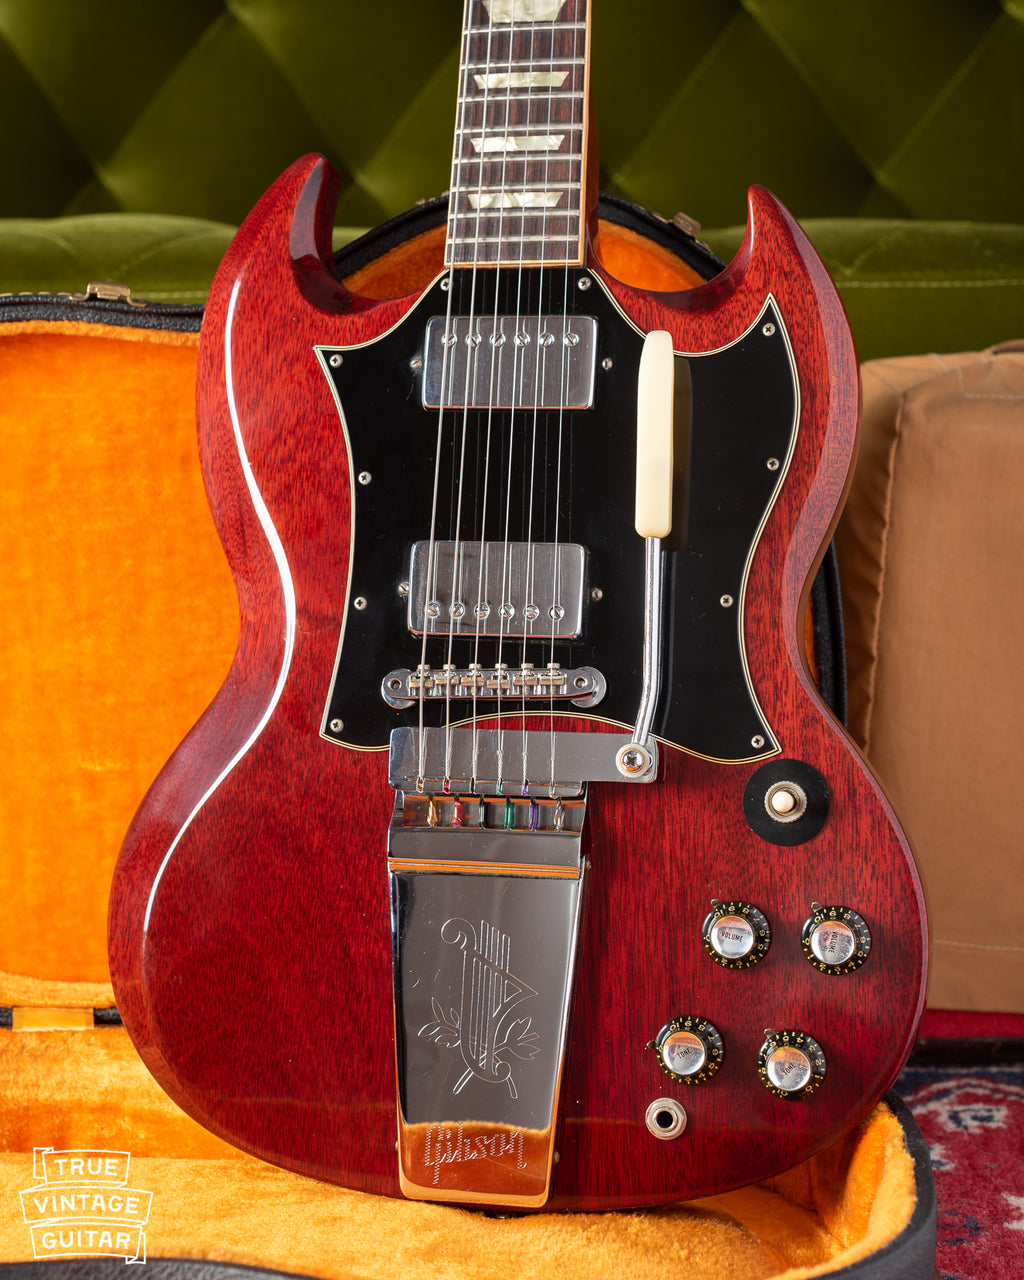 Gibson SG Standard 1969 Cherry Red with Lyre vibrola and large pickguard